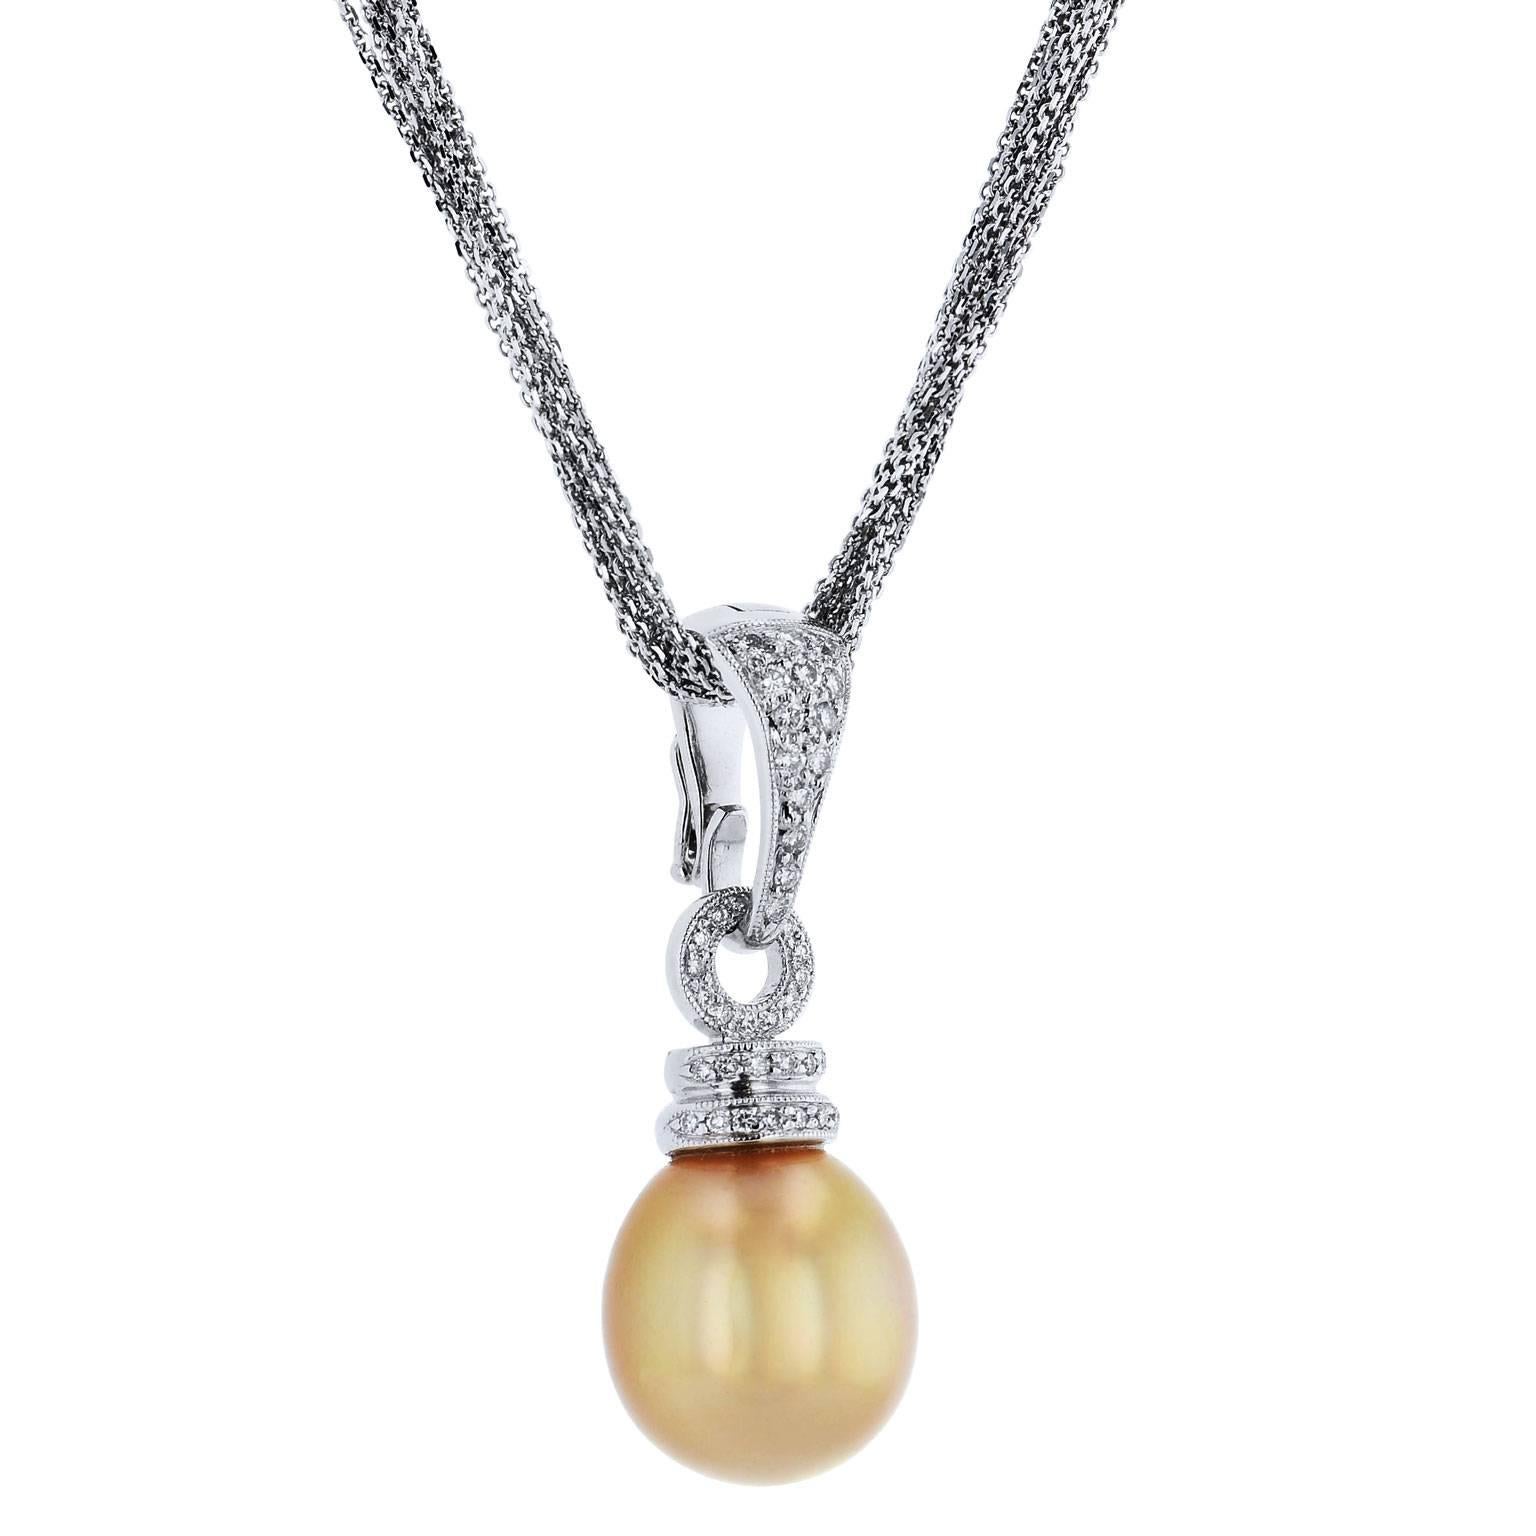 Golden South Sea Pearl and Pave Set Diamond Pendant 18 Karat White Gold 

This previously loved 18 karat white gold pendant necklace features a golden South Sea pearl measuring 15 x 13 millimetres and 0.50 carat of pave-set diamond up the bail. 